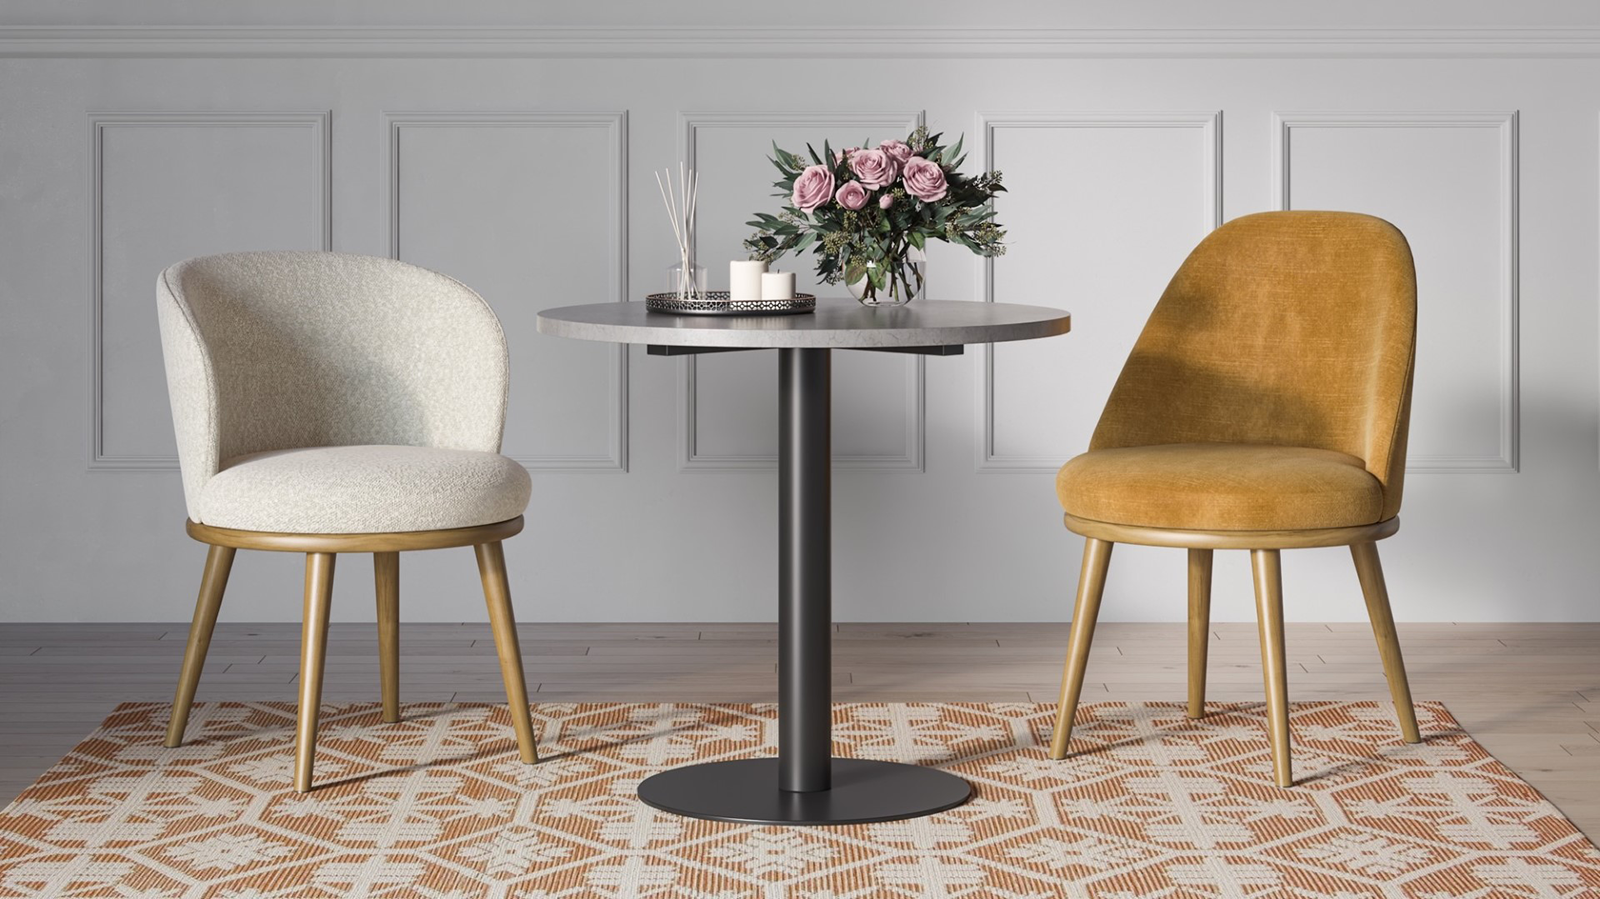 two chairs around a round table with flowers